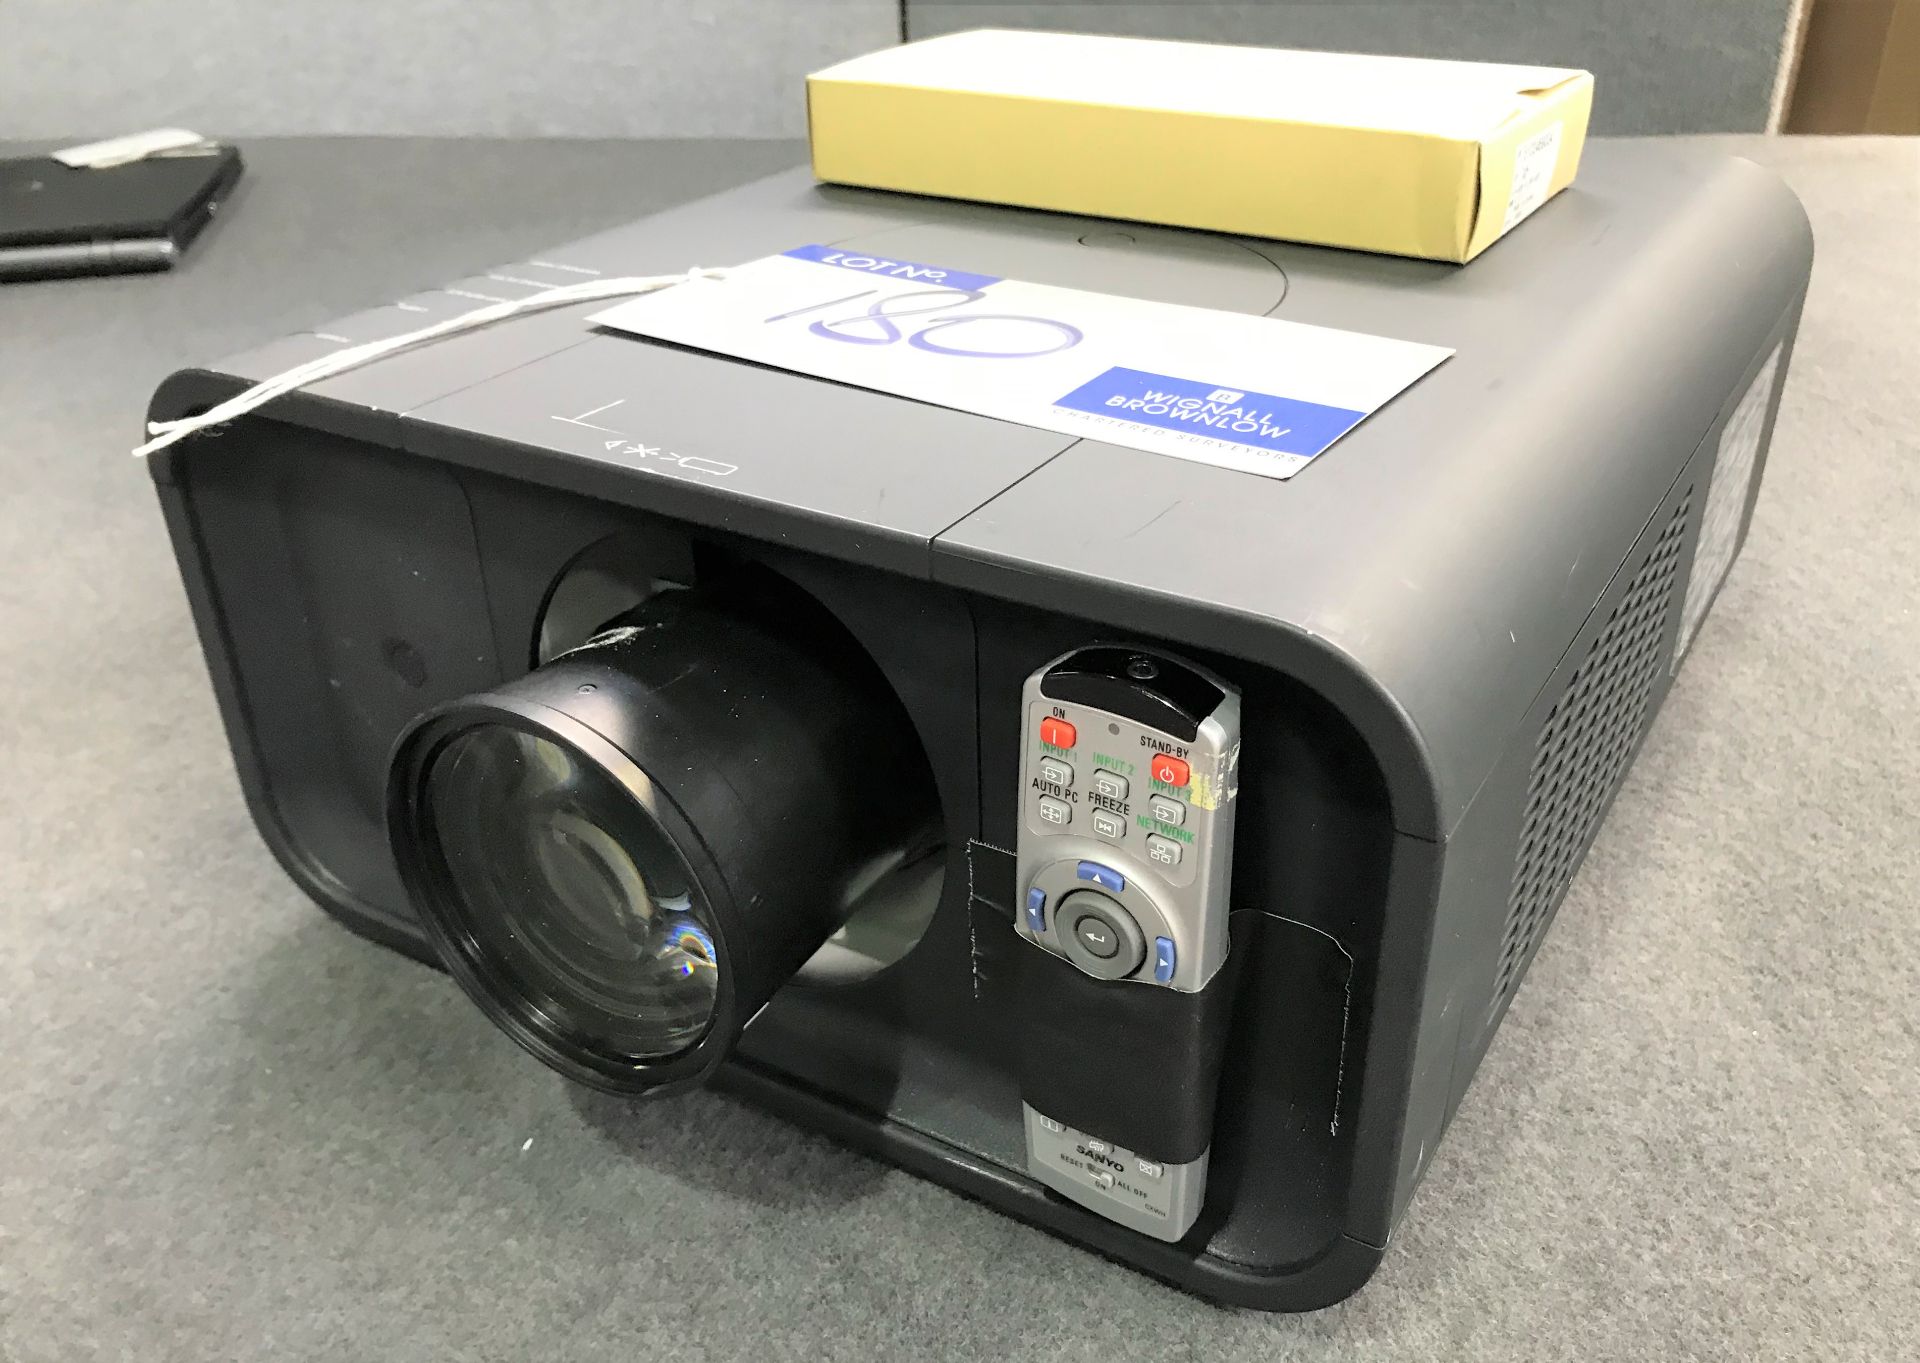 A Sanyo PROxtra X Model PLC-XP100BKL Multiverse Projector No.G7201708 with remote controller and